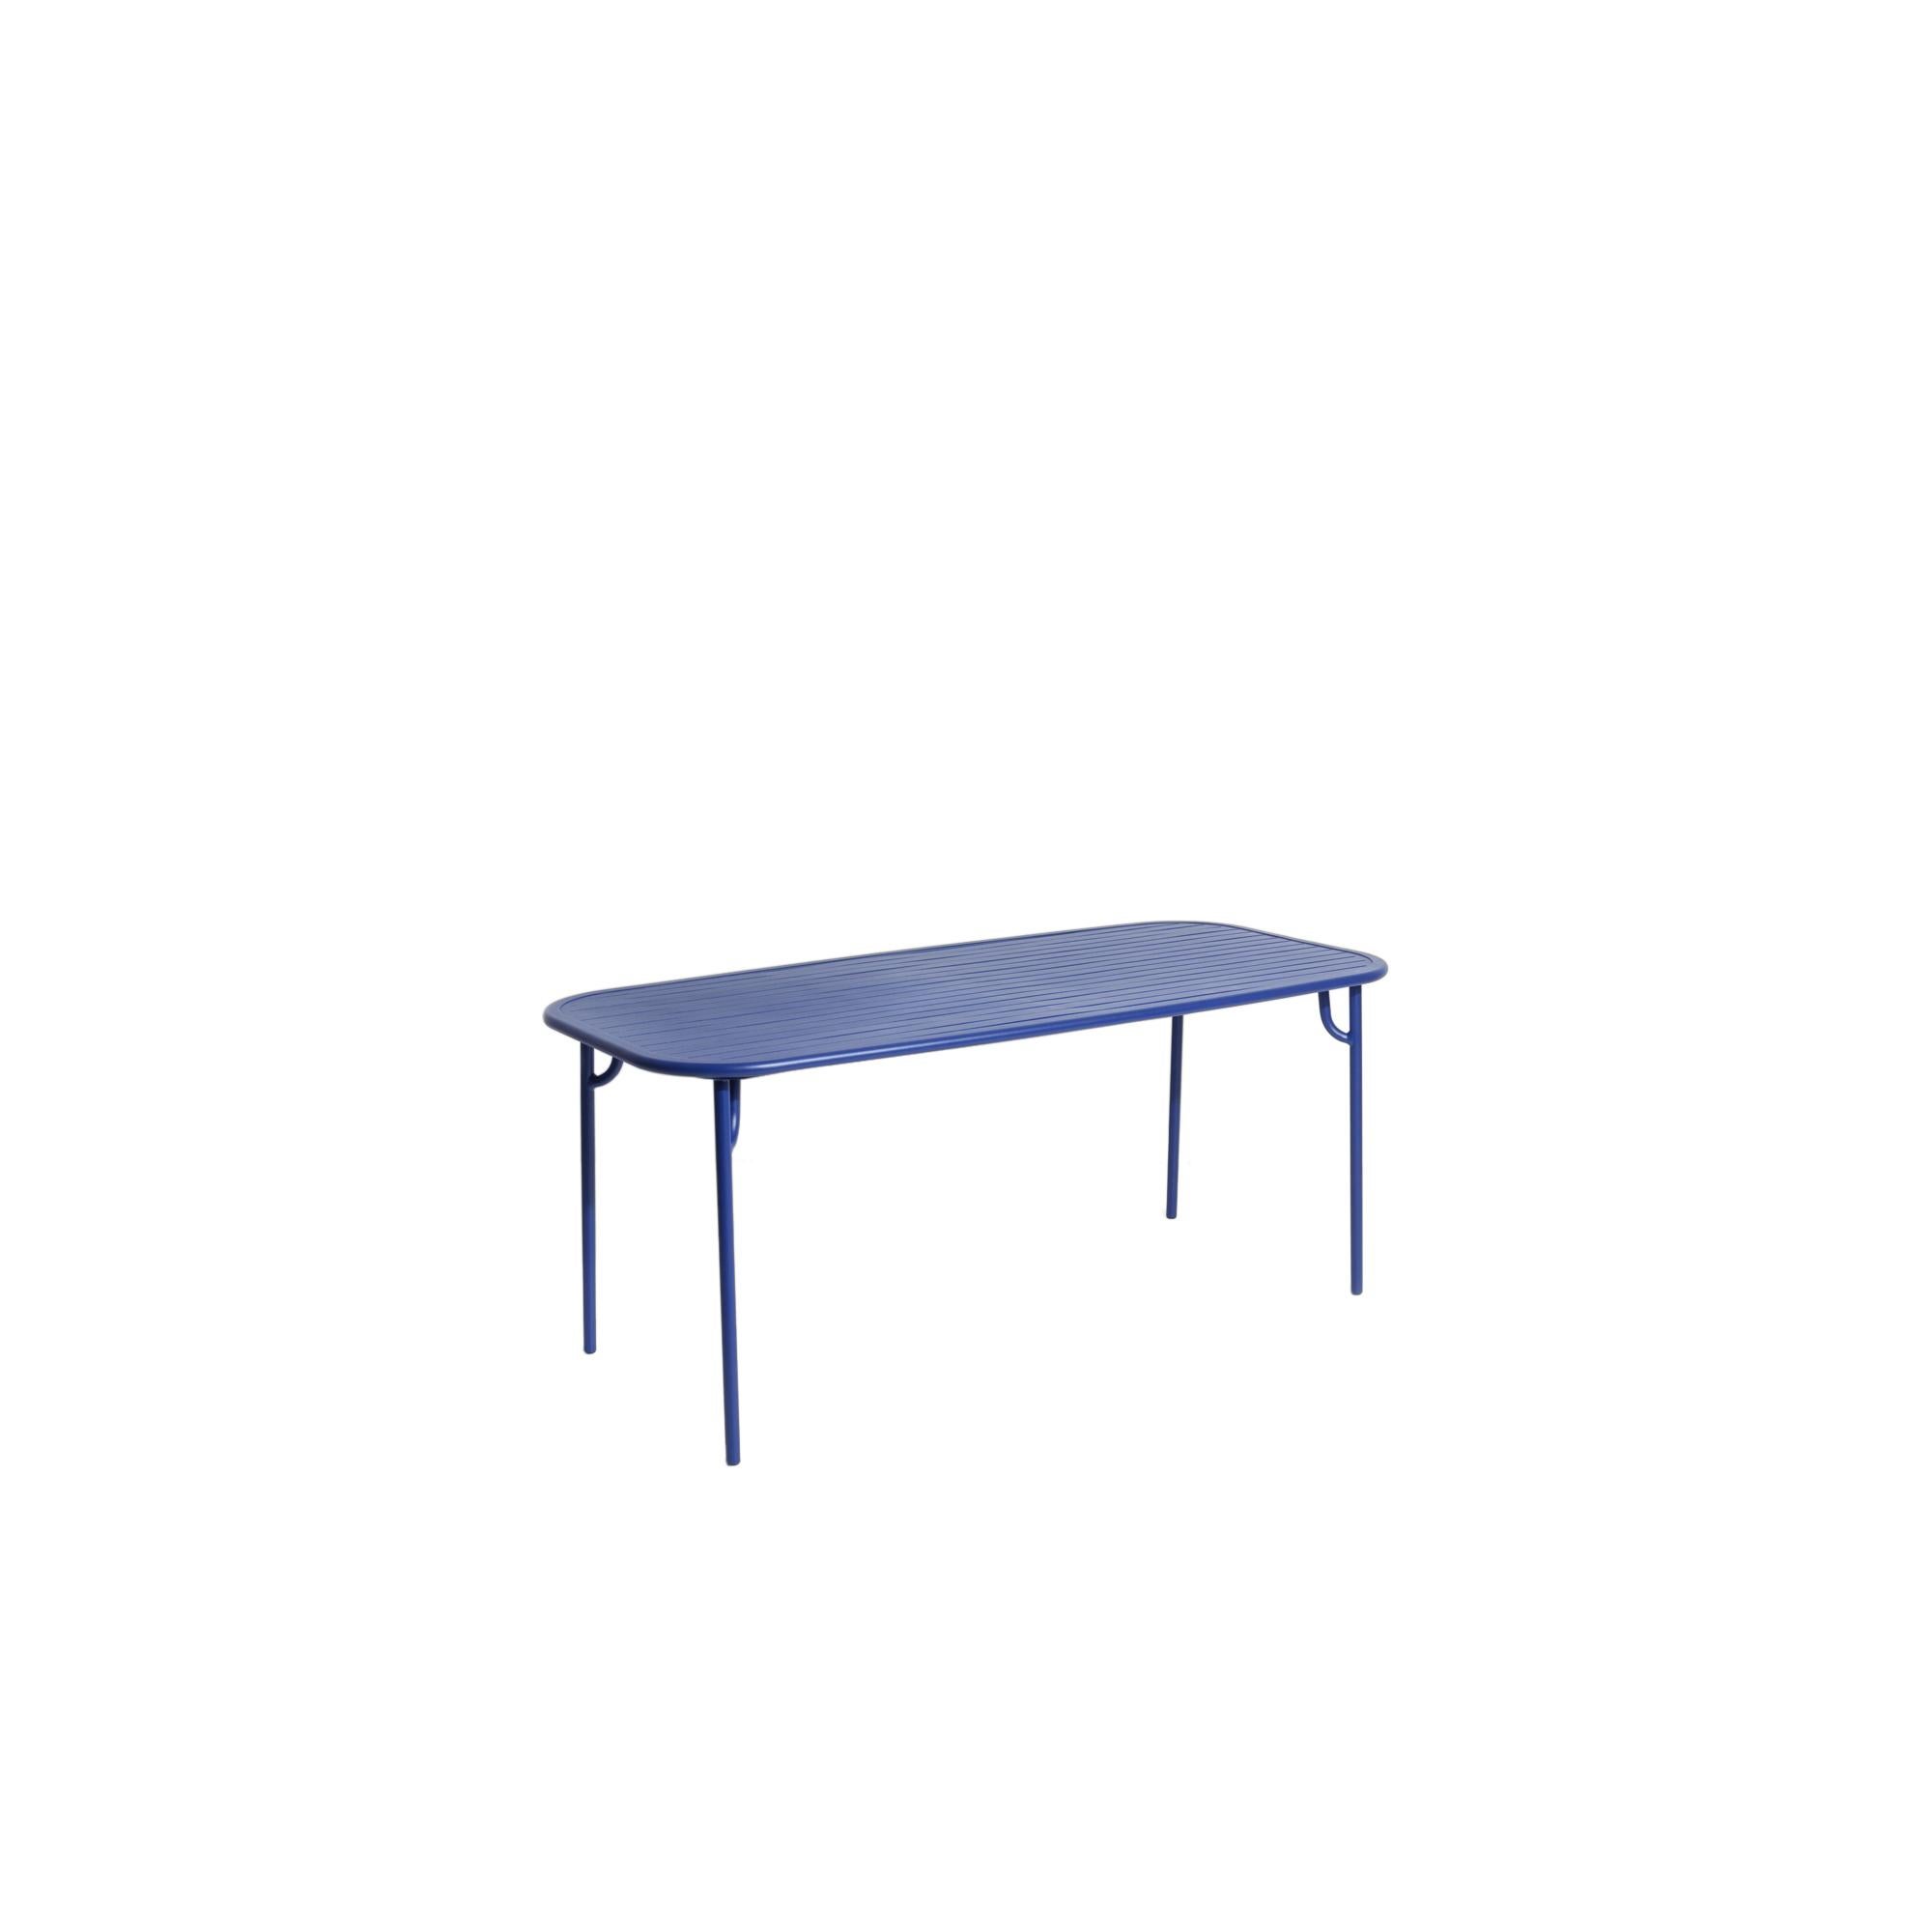 Petite Friture Week-End Medium Rectangular Dining Table in Blue Aluminium with Slats by Studio BrichetZiegler, 2017

The week-end collection is a full range of outdoor furniture, in aluminium grained epoxy paint, matt finish, that includes 18